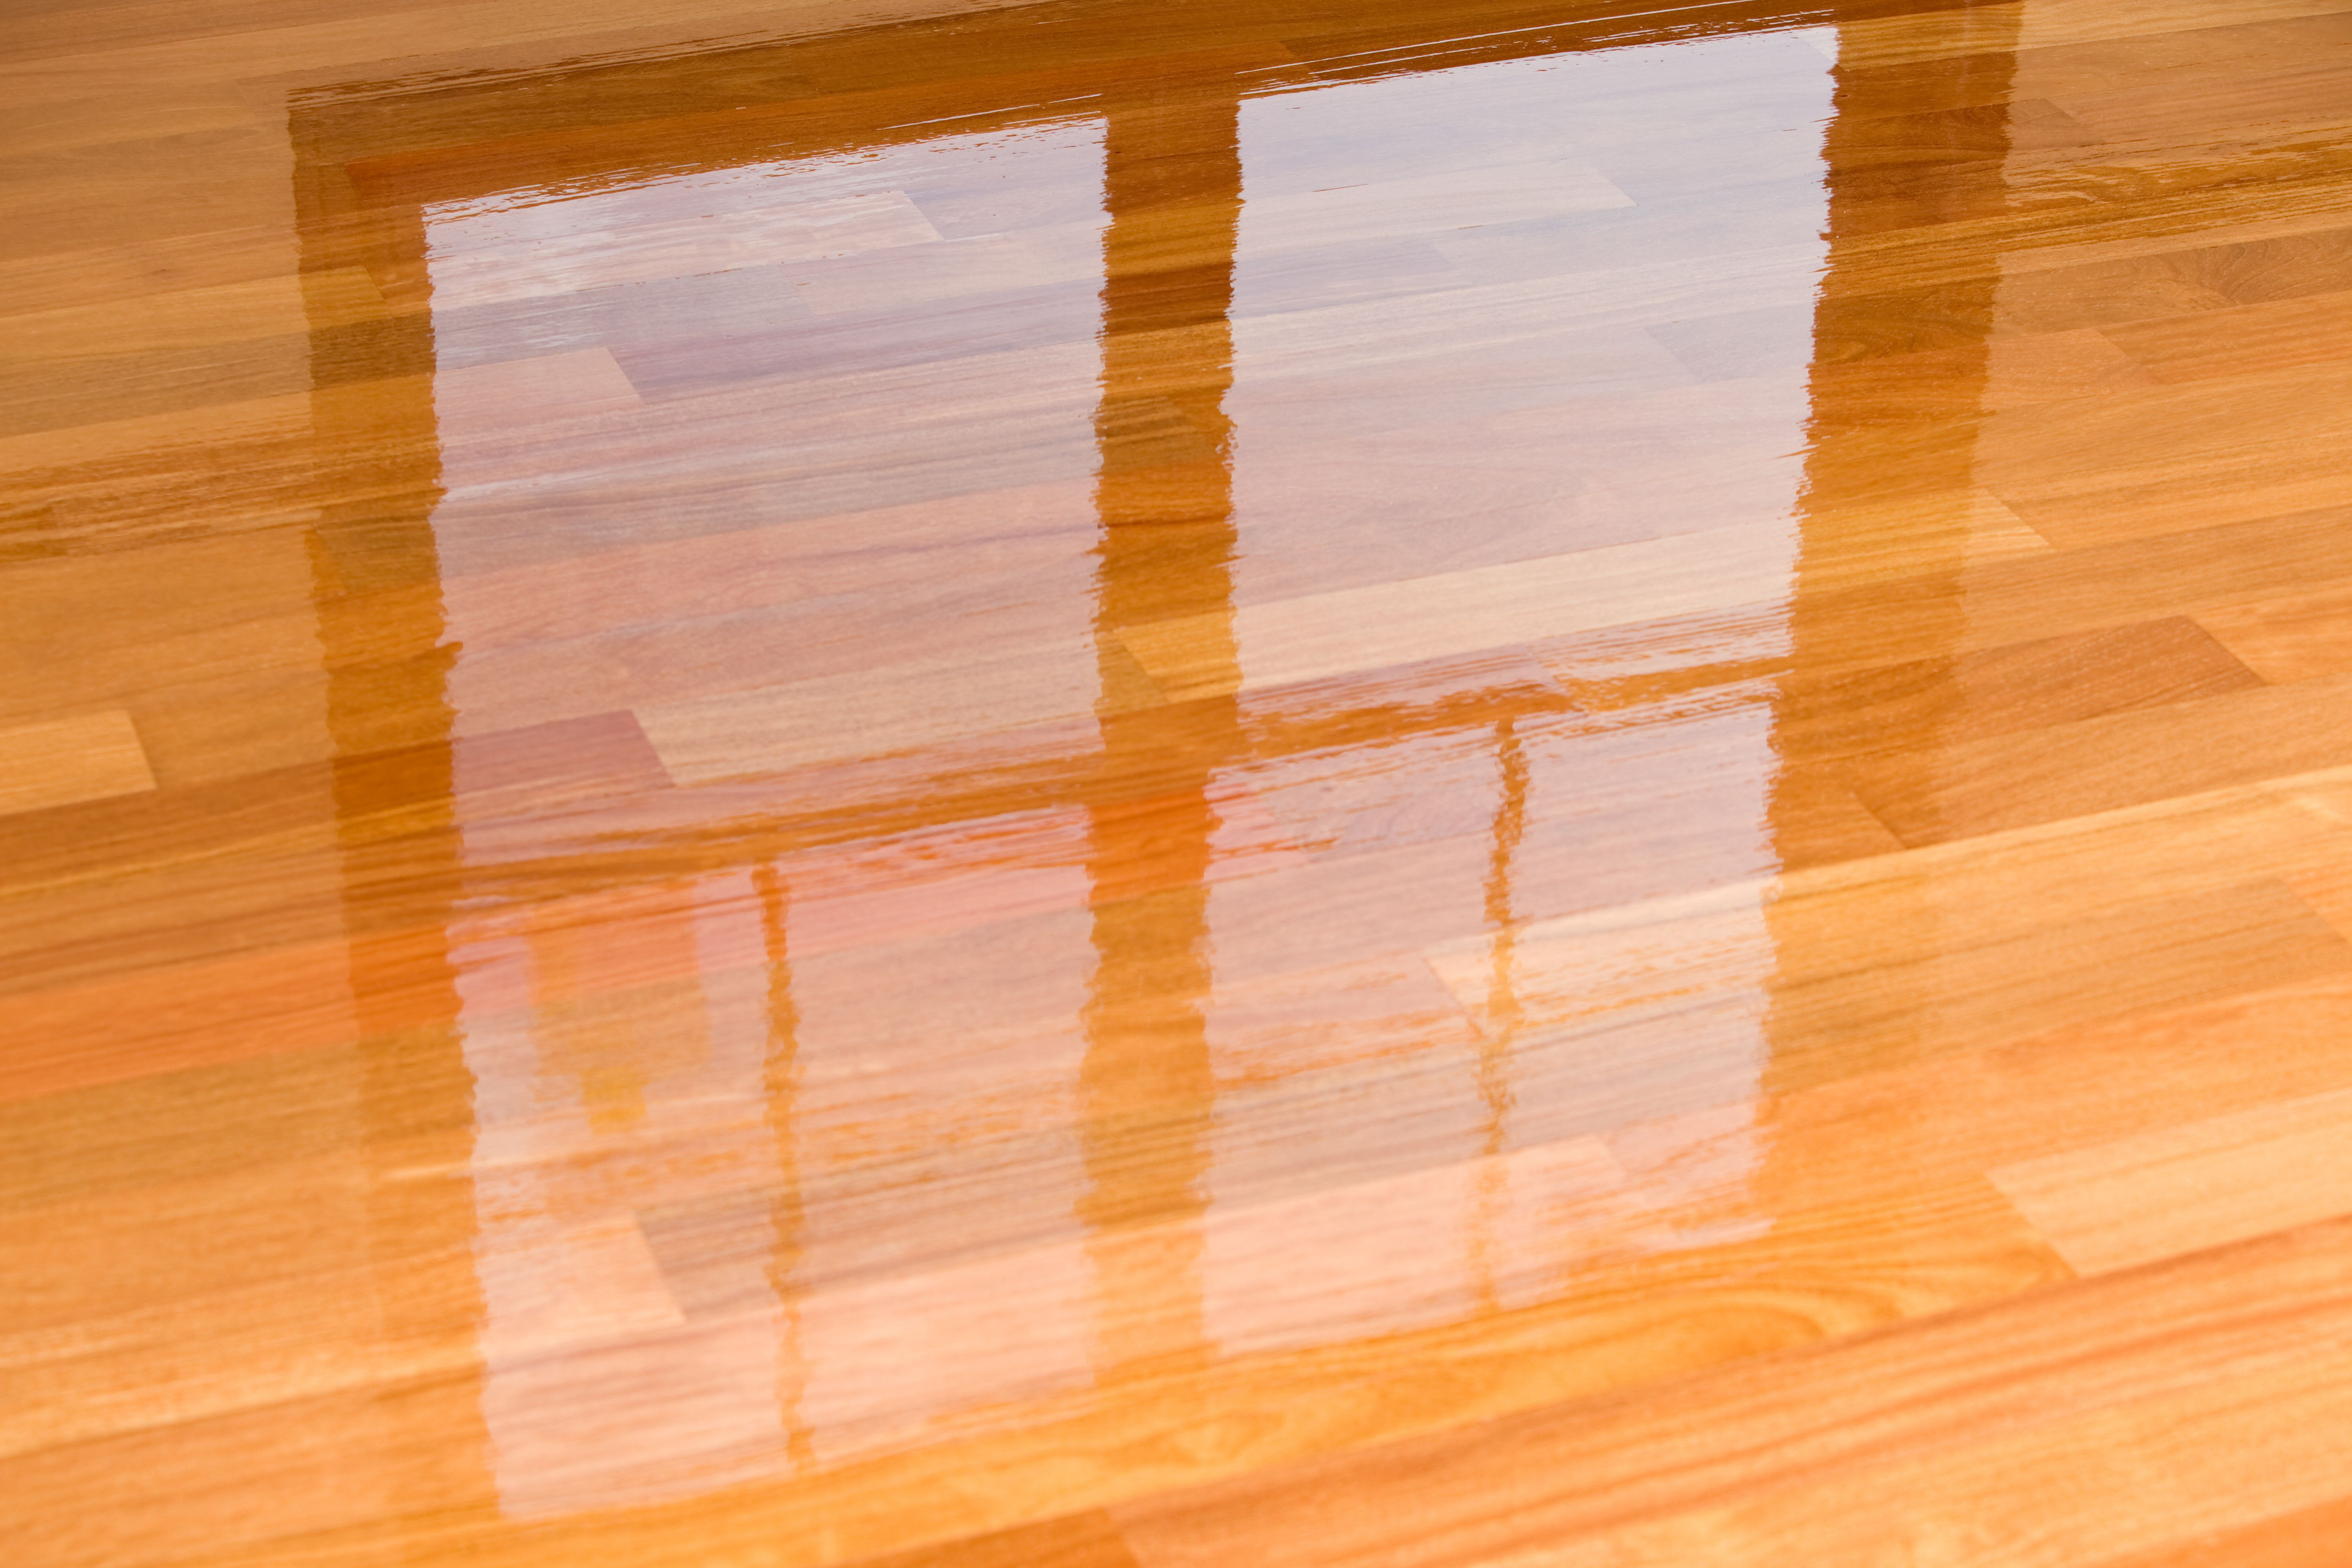 2 Inch Oak Hardwood Flooring Of Guide to Laminate Flooring Water and Damage Repair with Wet Polyurethane On New Hardwood Floor with Window Reflection 183846705 582e34da3df78c6f6a403968